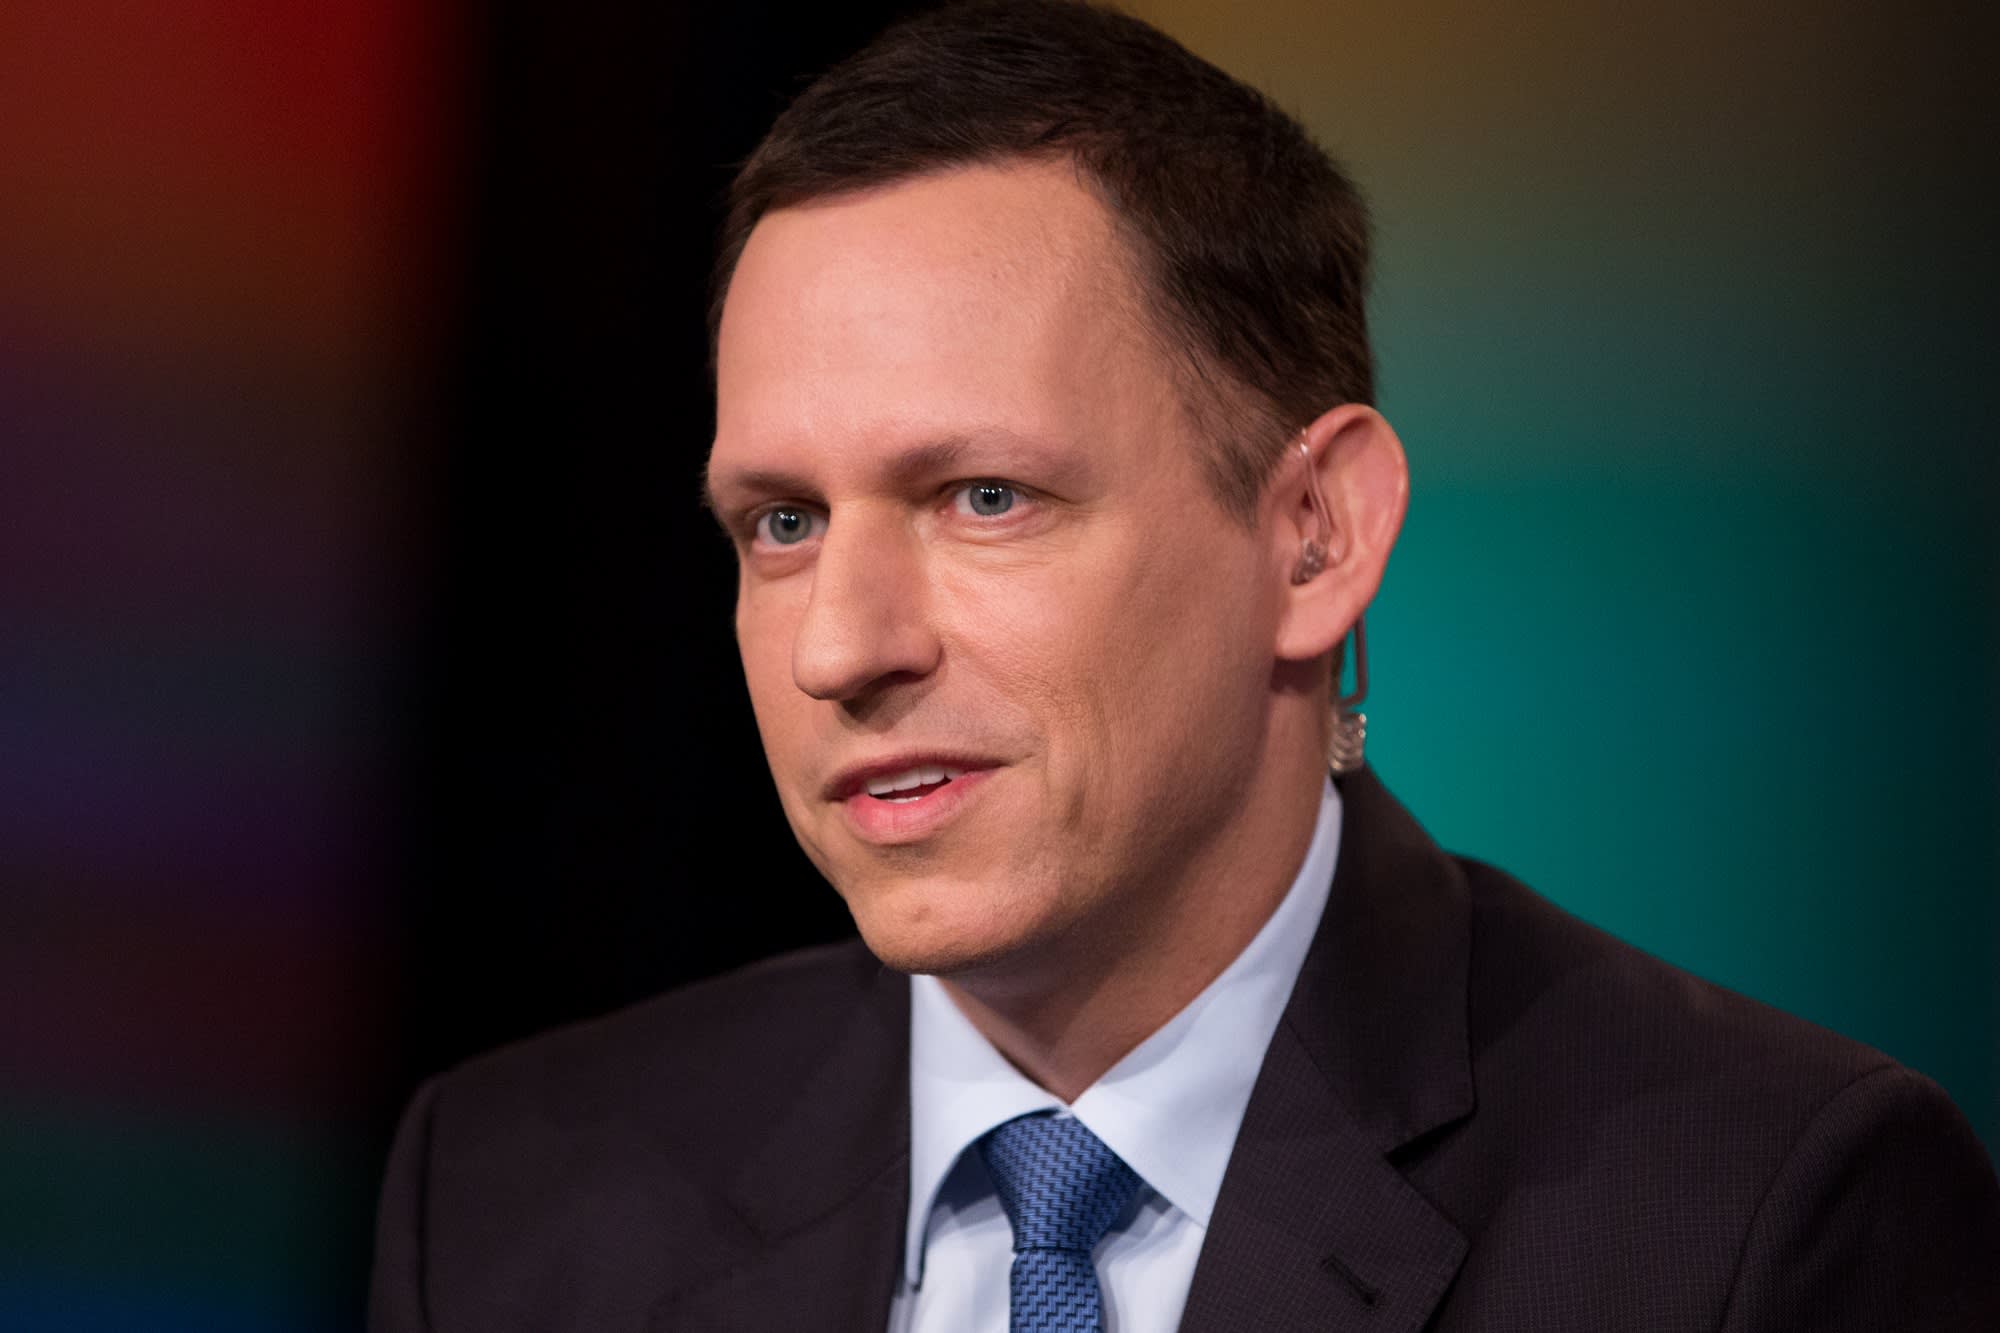 Bitcoin potential 'very underestimated', billionaire Peter Thiel says